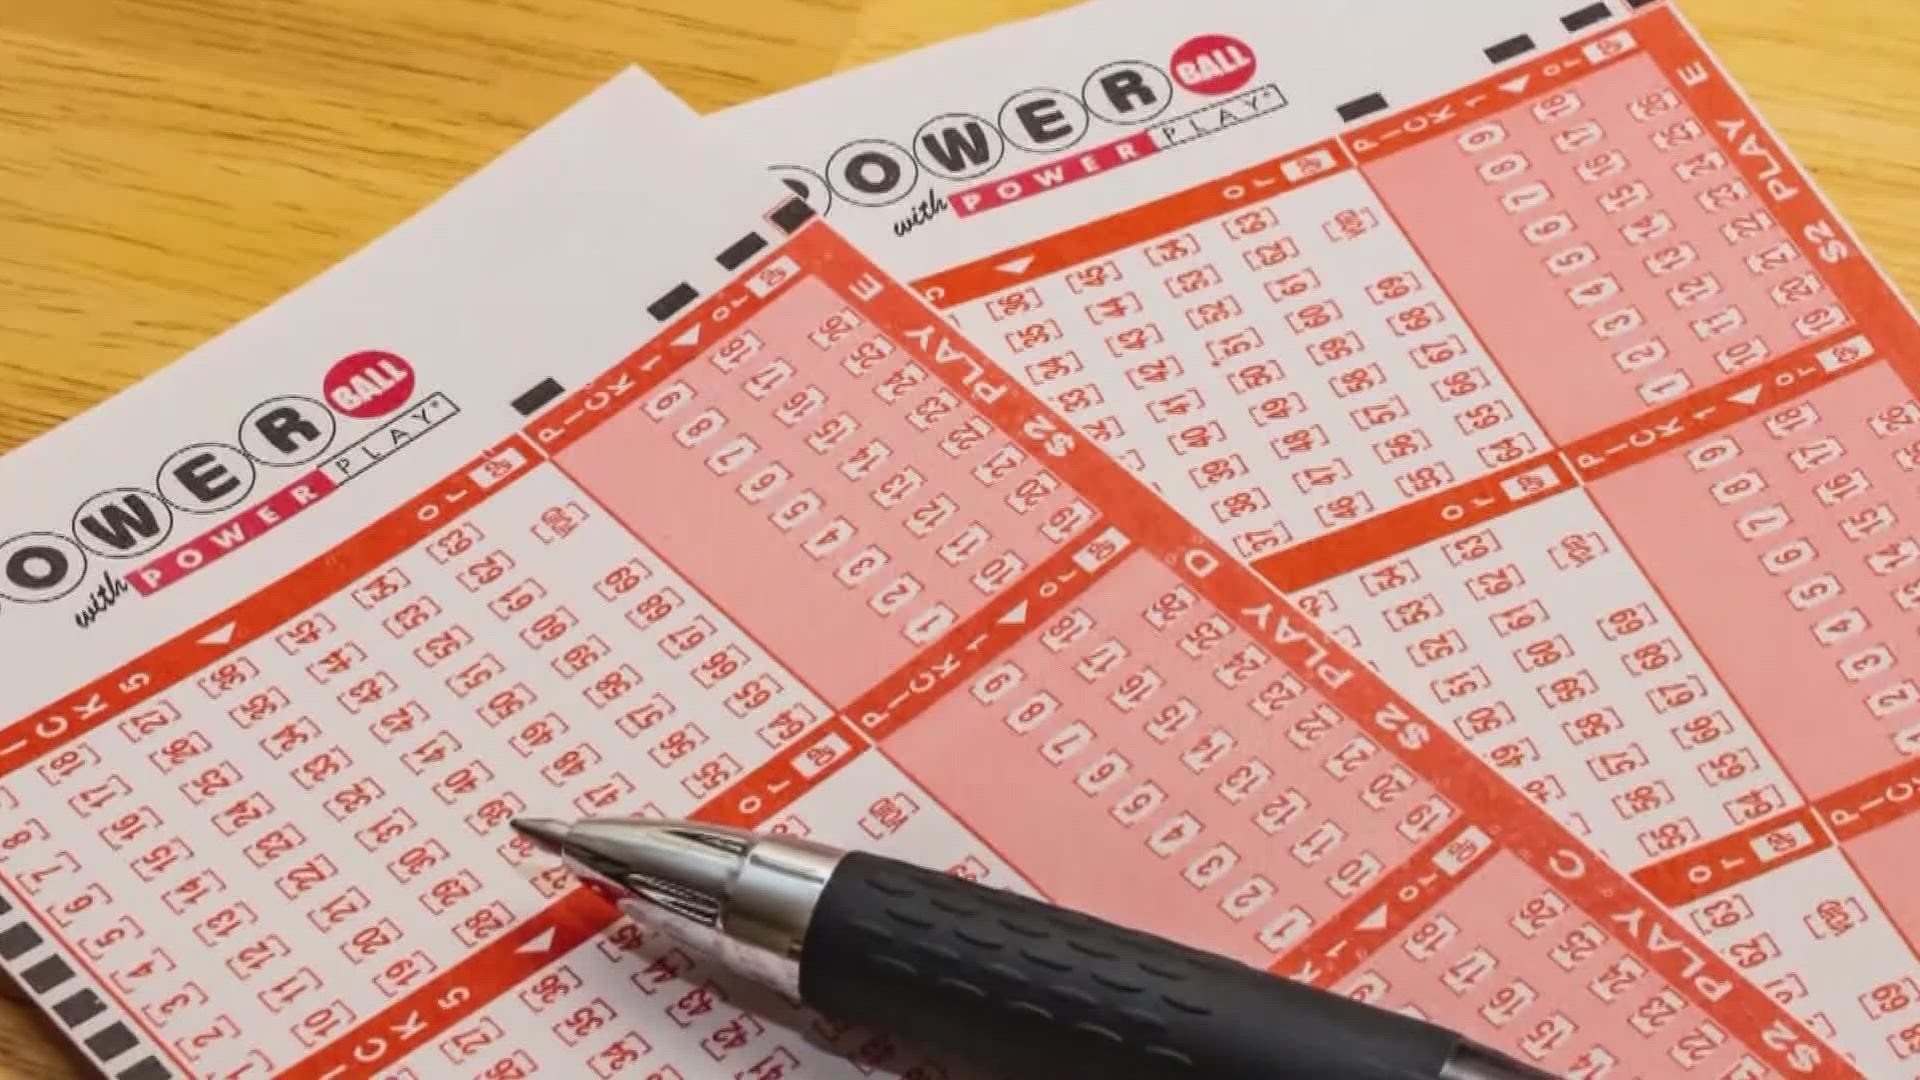 After 39 drawings without a grand prize winner, the Powerball jackpot has reached an astronomical sum, cementing it as the biggest U.S. lottery jackpot ever.